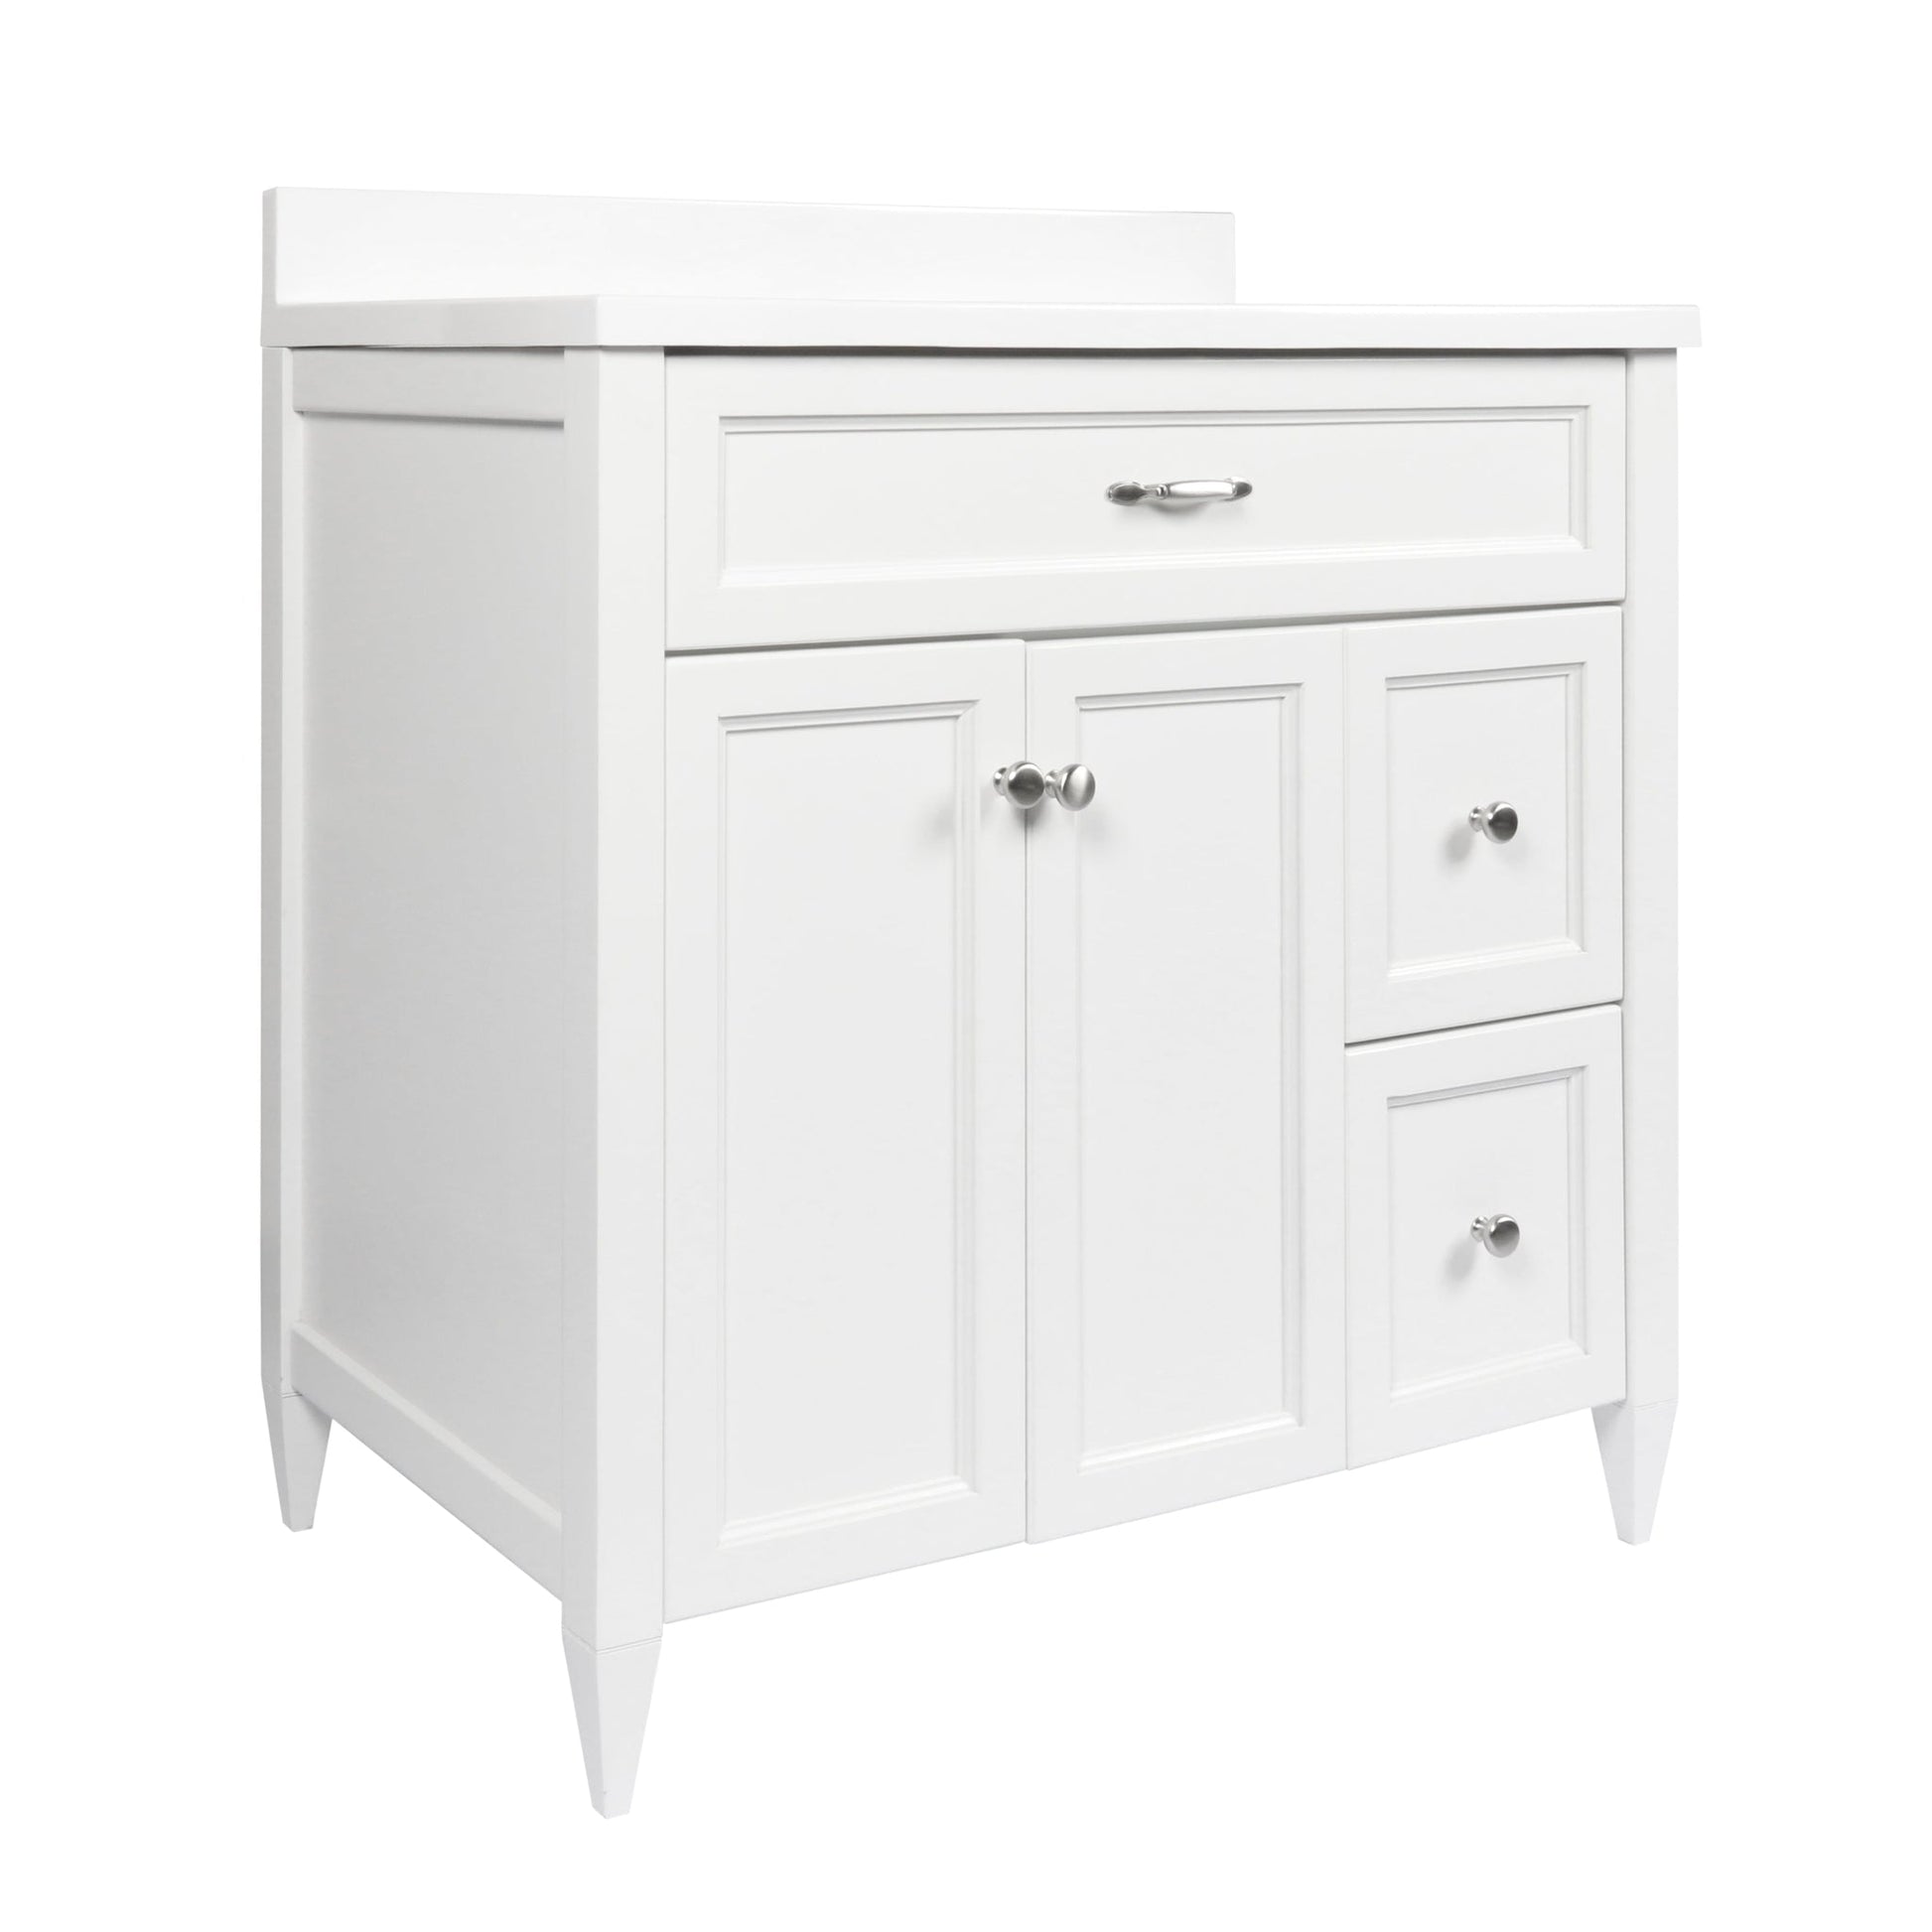 Ella’s Bubbles Vail 37" White Bathroom Vanity With White Cultured Marble Top With White Backsplash and Sink